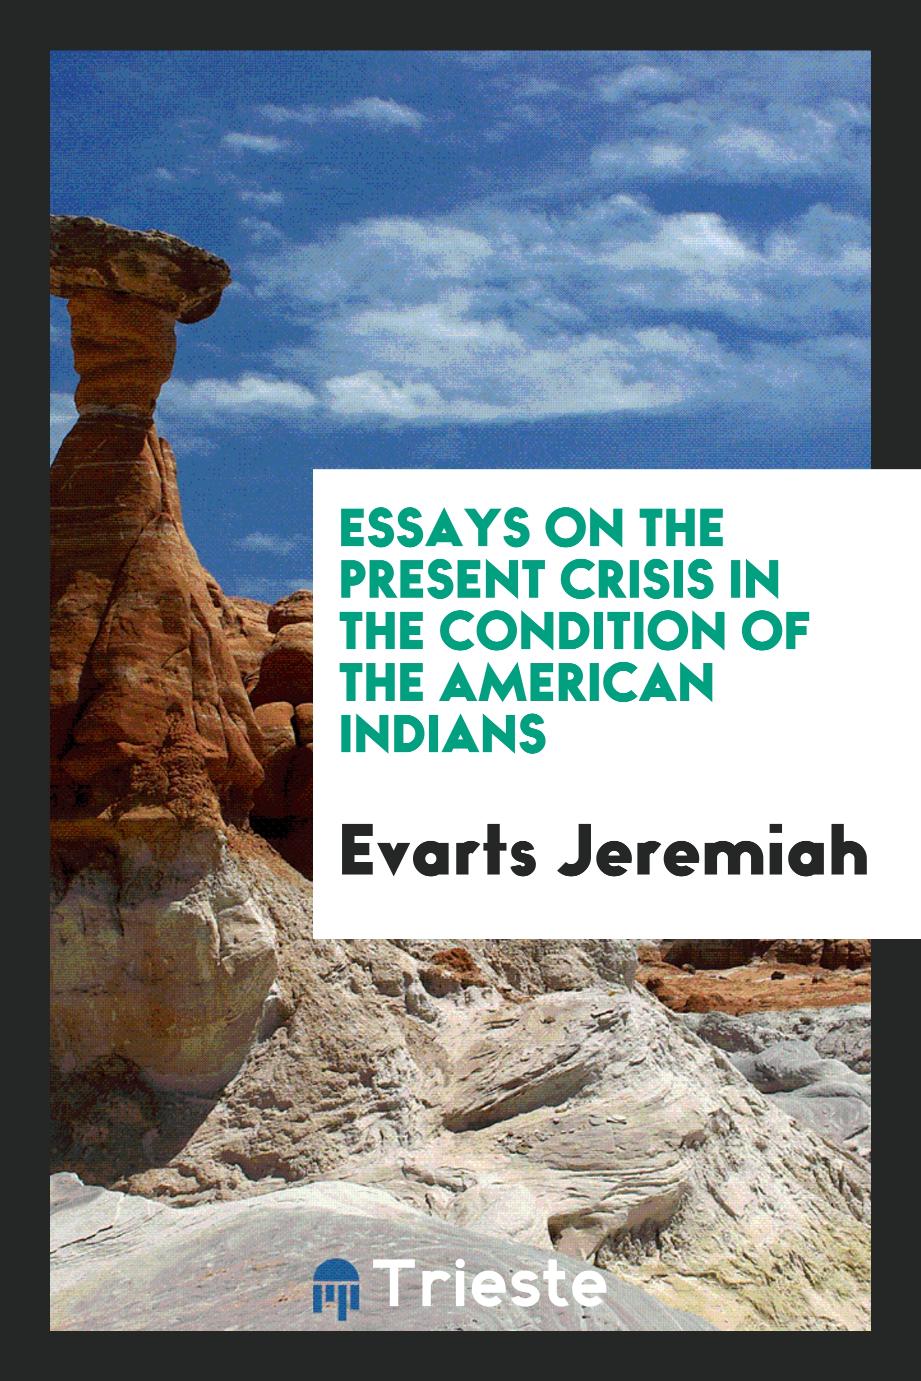 Essays on the Present Crisis in the Condition of the American Indians